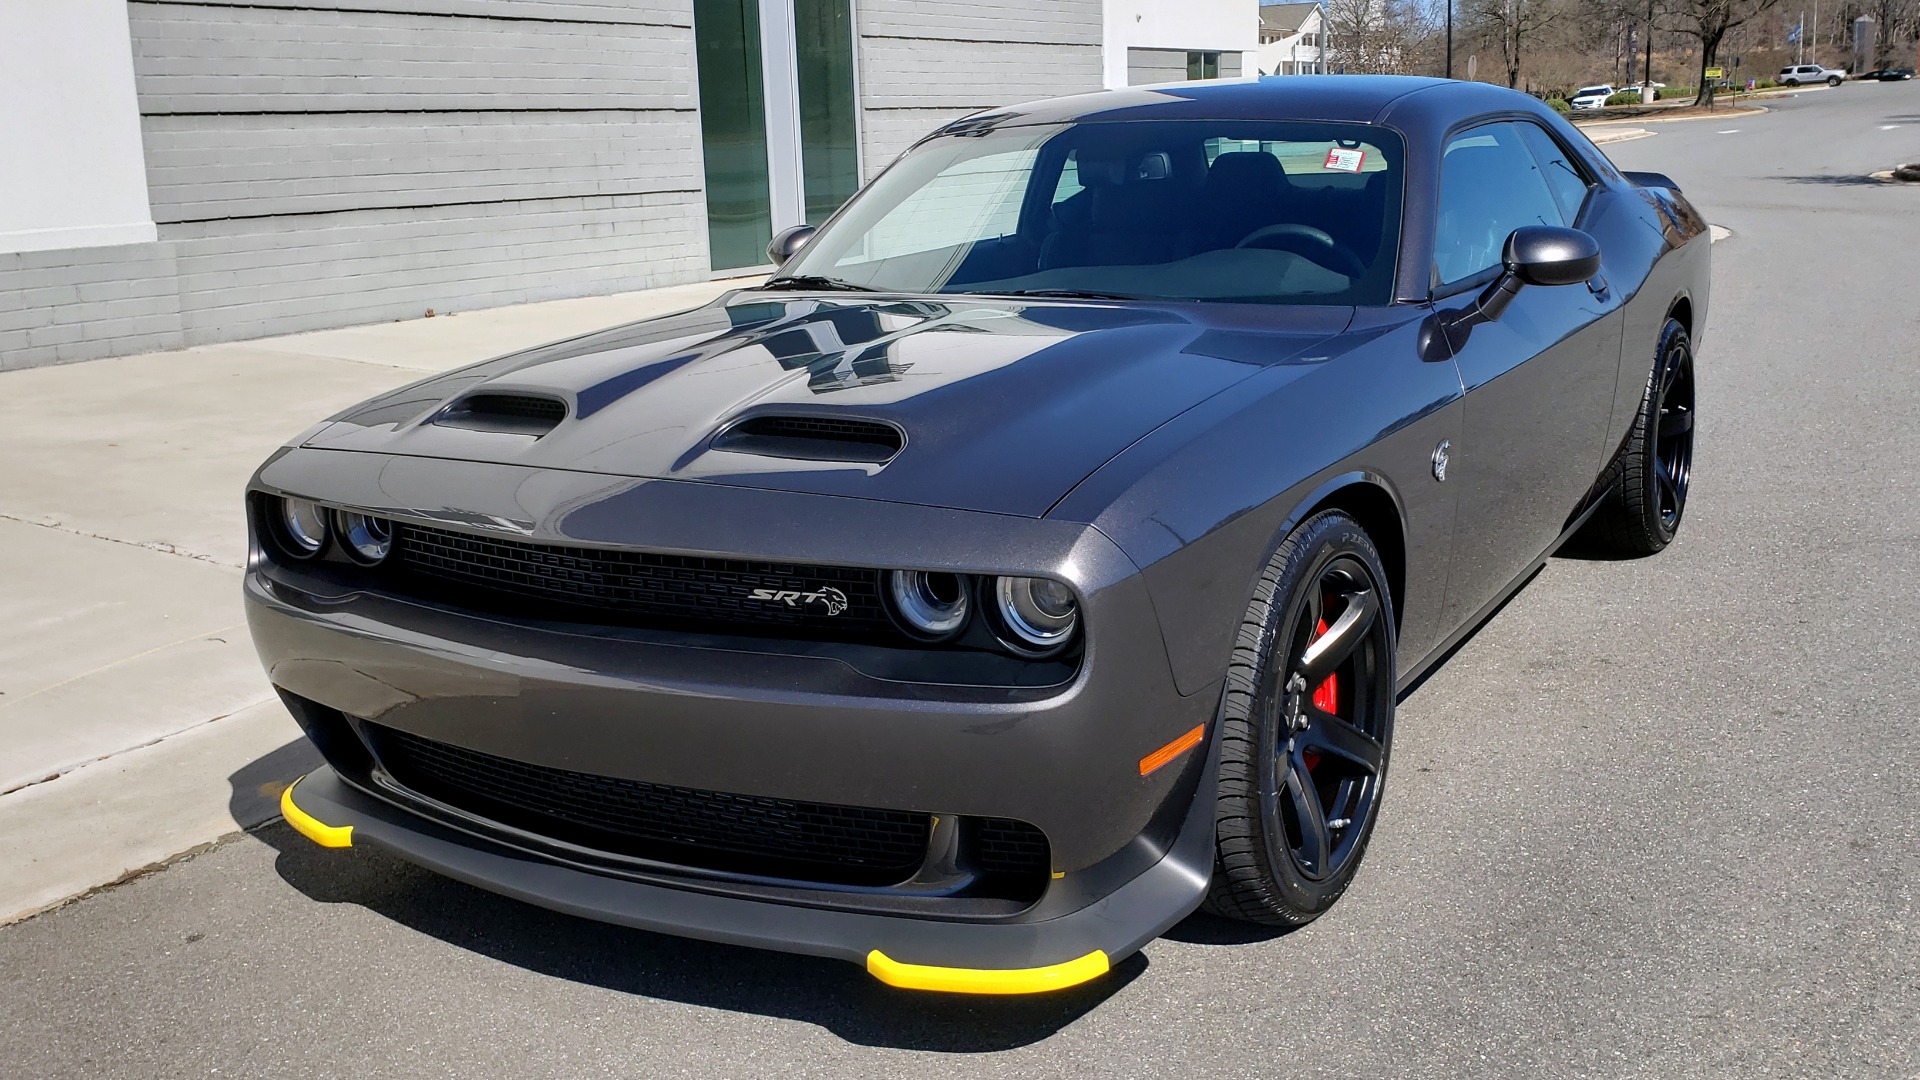 Used 2020 Dodge CHALLENGER SRT HELLCAT (717HP) / NAV / AUTO / CLOTH / REARVIEW / LOW MILES for sale Sold at Formula Imports in Charlotte NC 28227 11